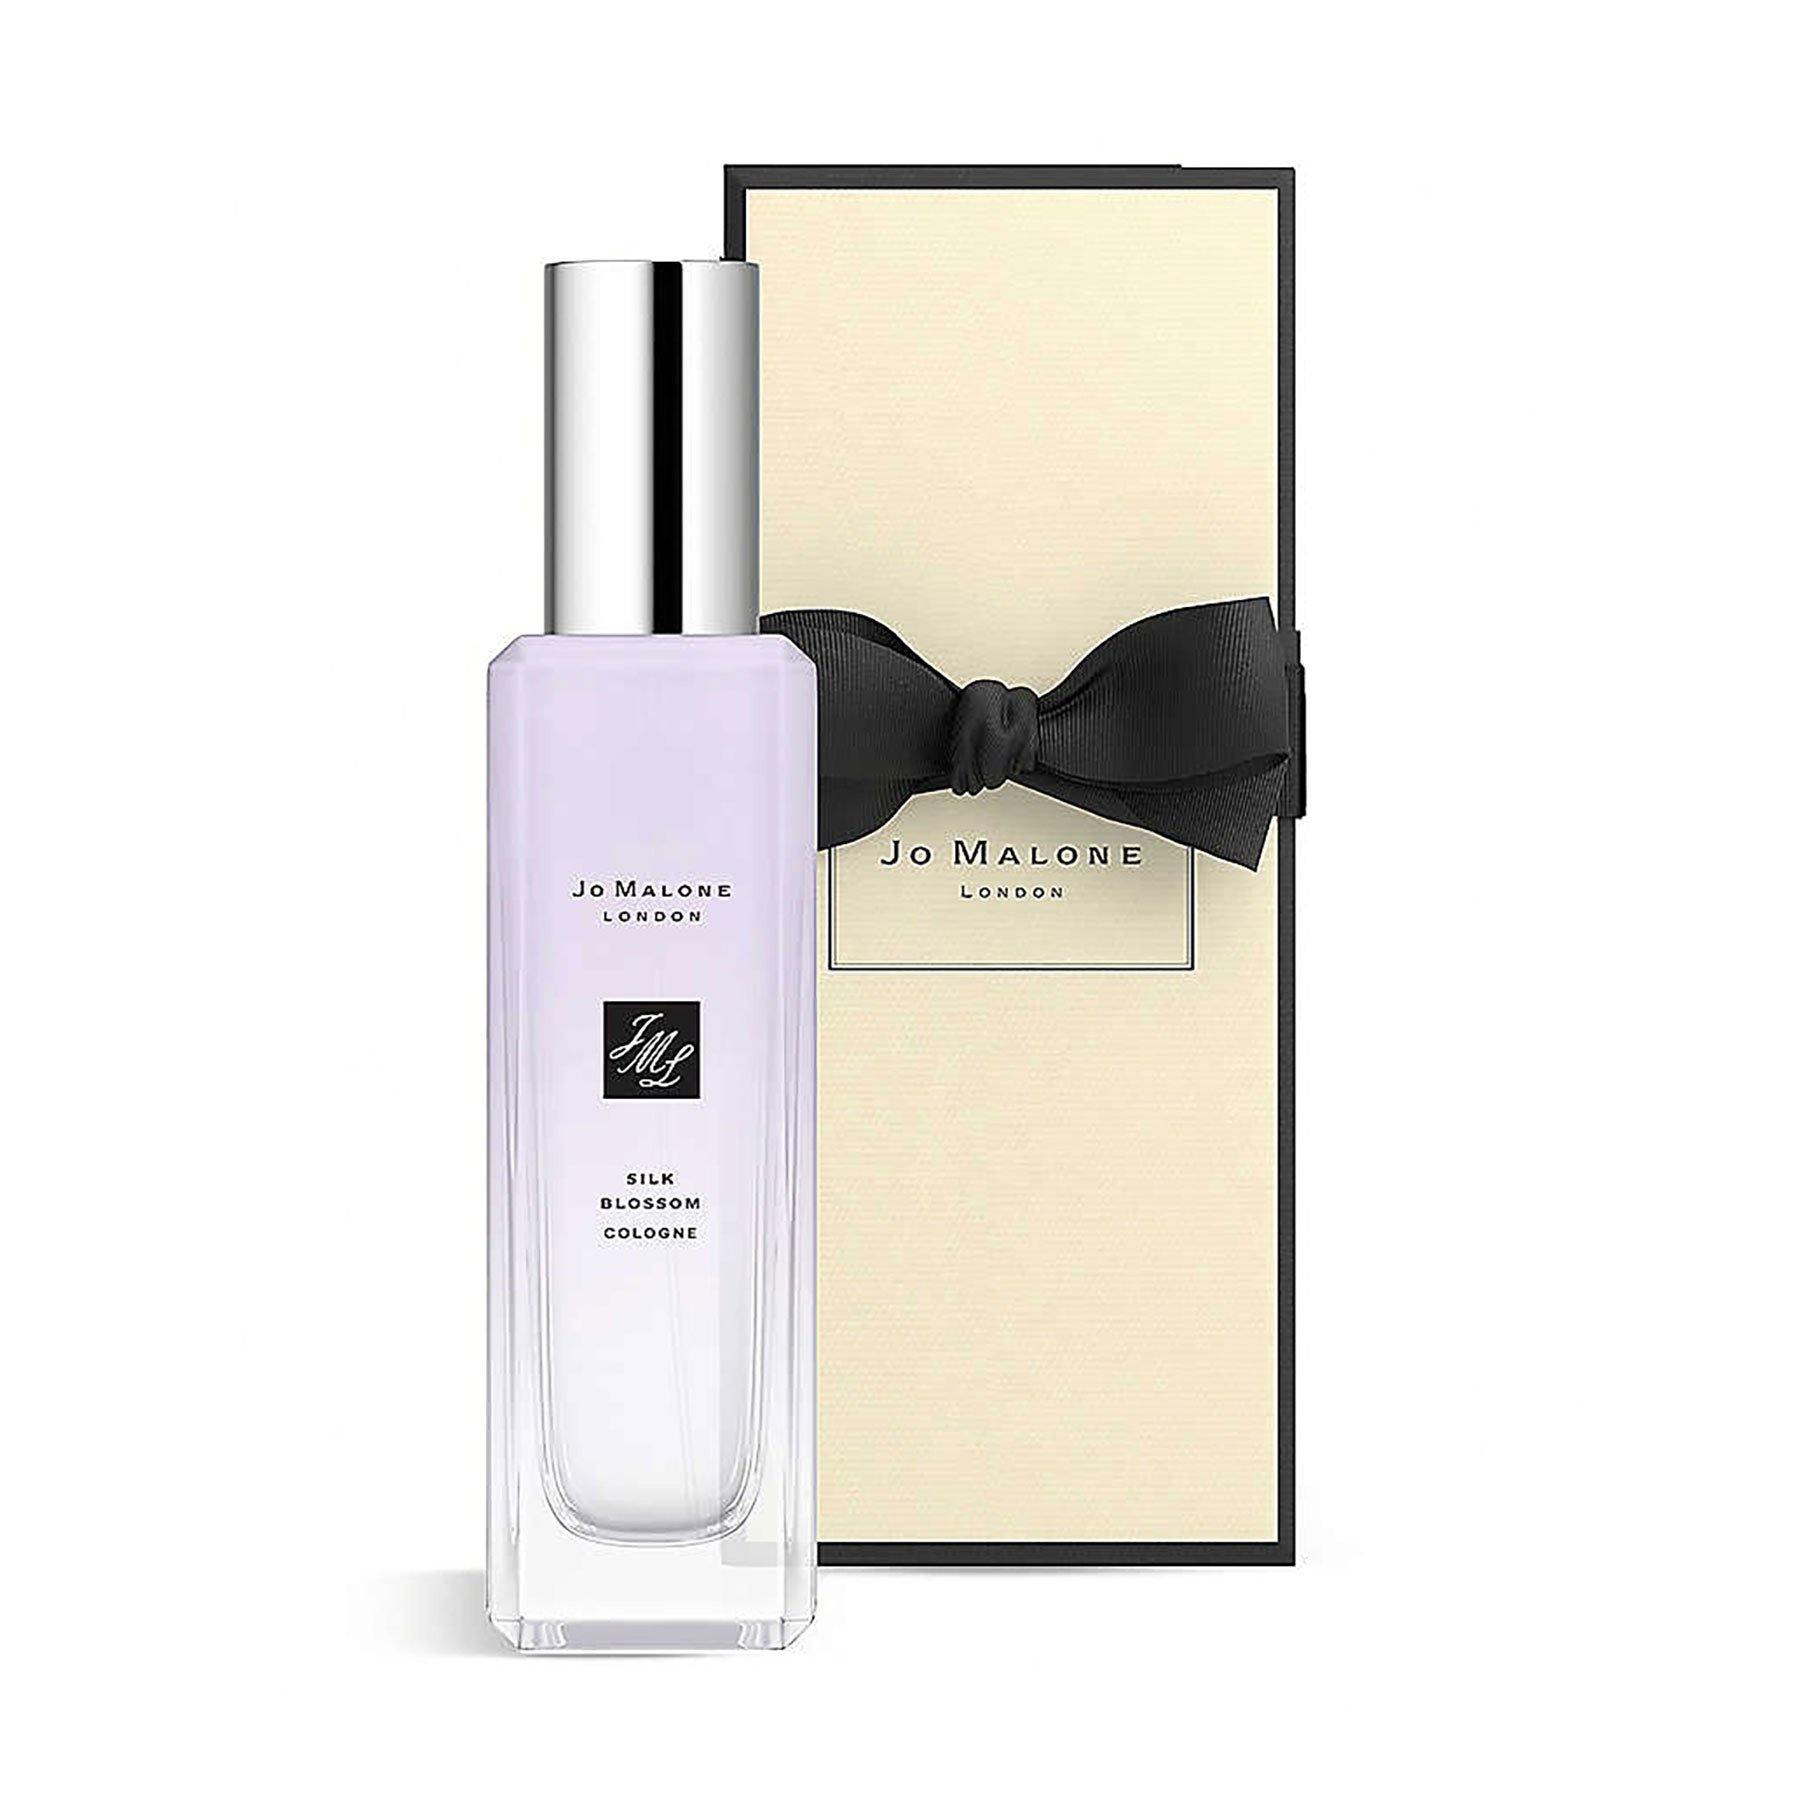 Silk Blossom Cologne - Cosmos Boutique New Jersey